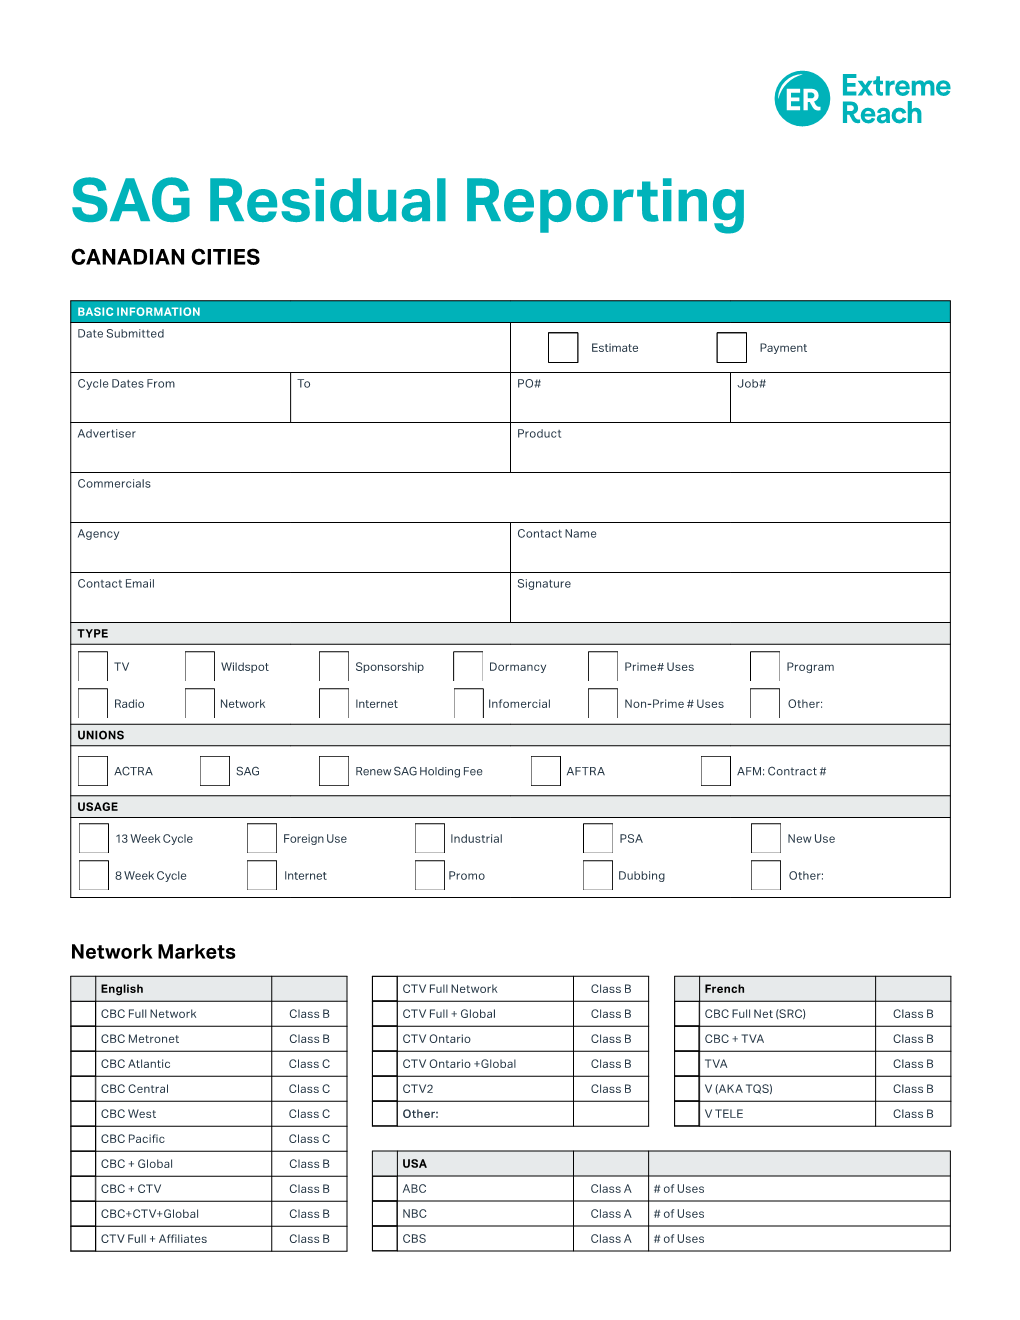 SAG Residual Reporting for Canadian Cities